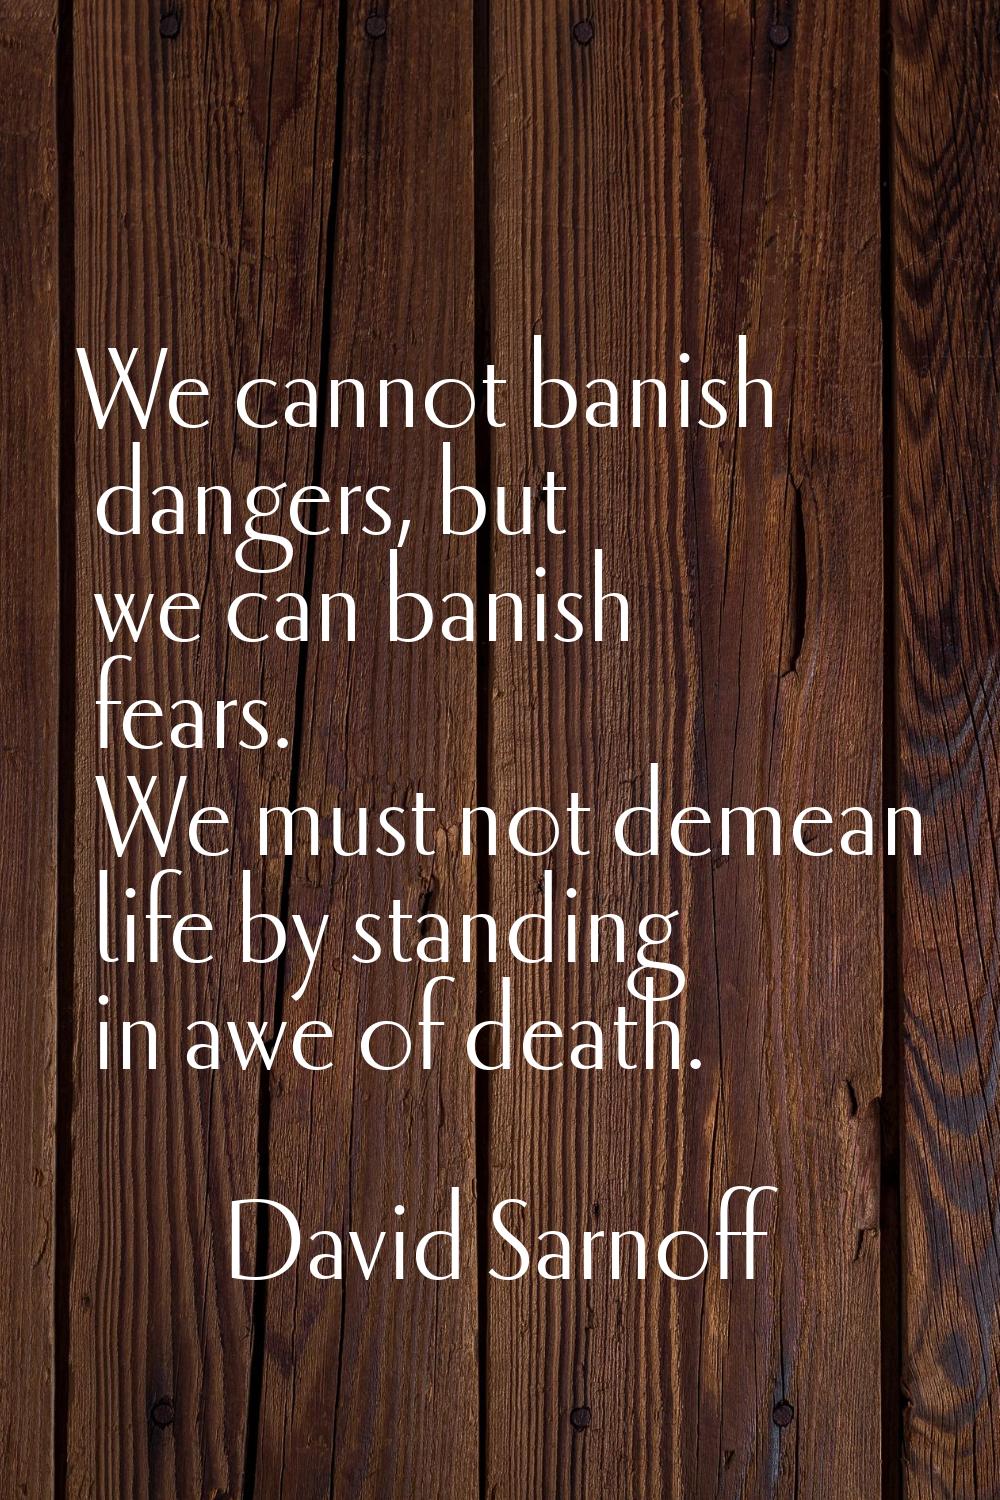 We cannot banish dangers, but we can banish fears. We must not demean life by standing in awe of de